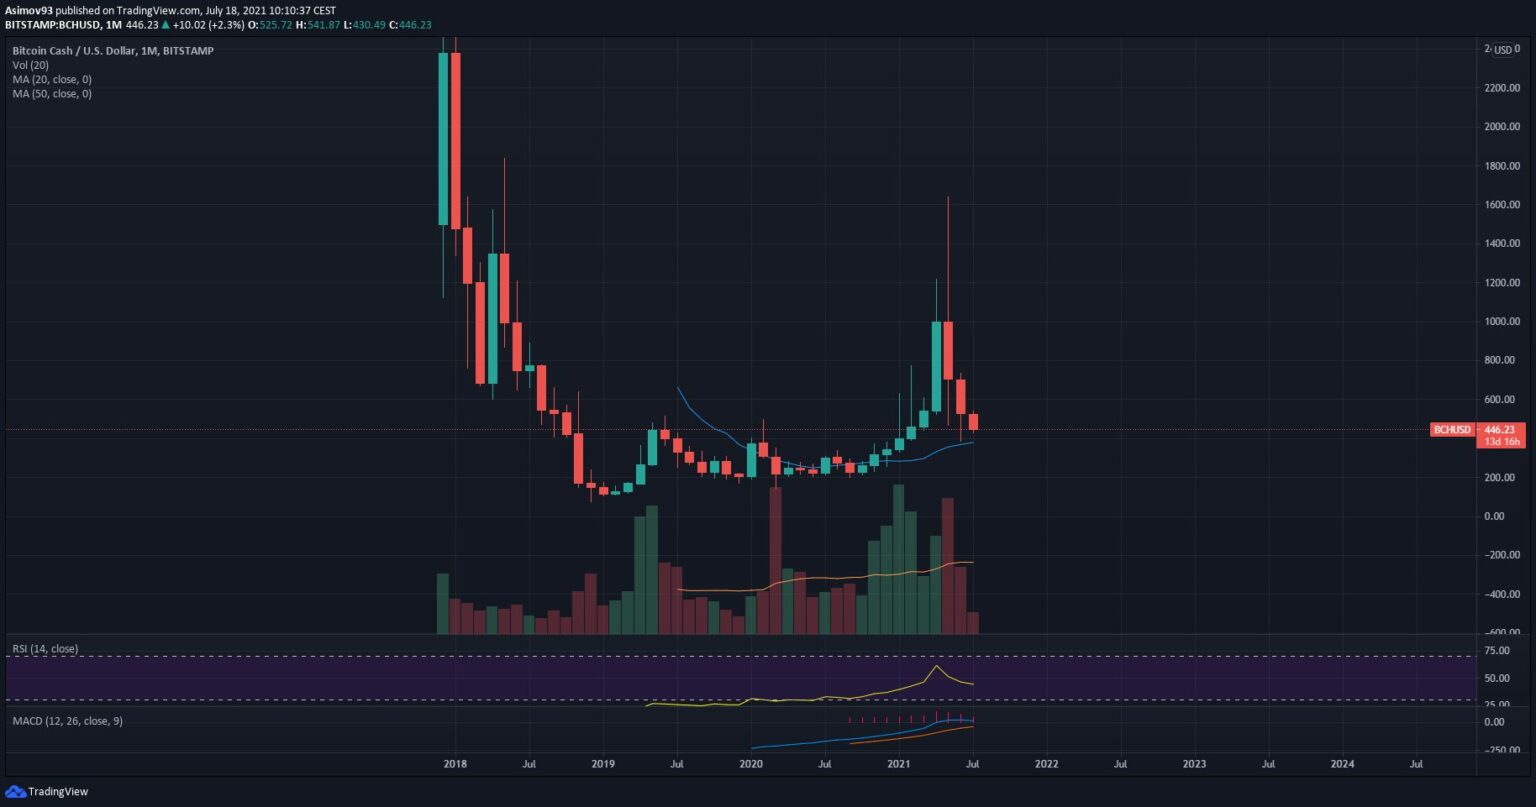 18.07.21 Technical analysis BCH / USD - is the imaginary spring sufficiently compressed on BTC Cash?